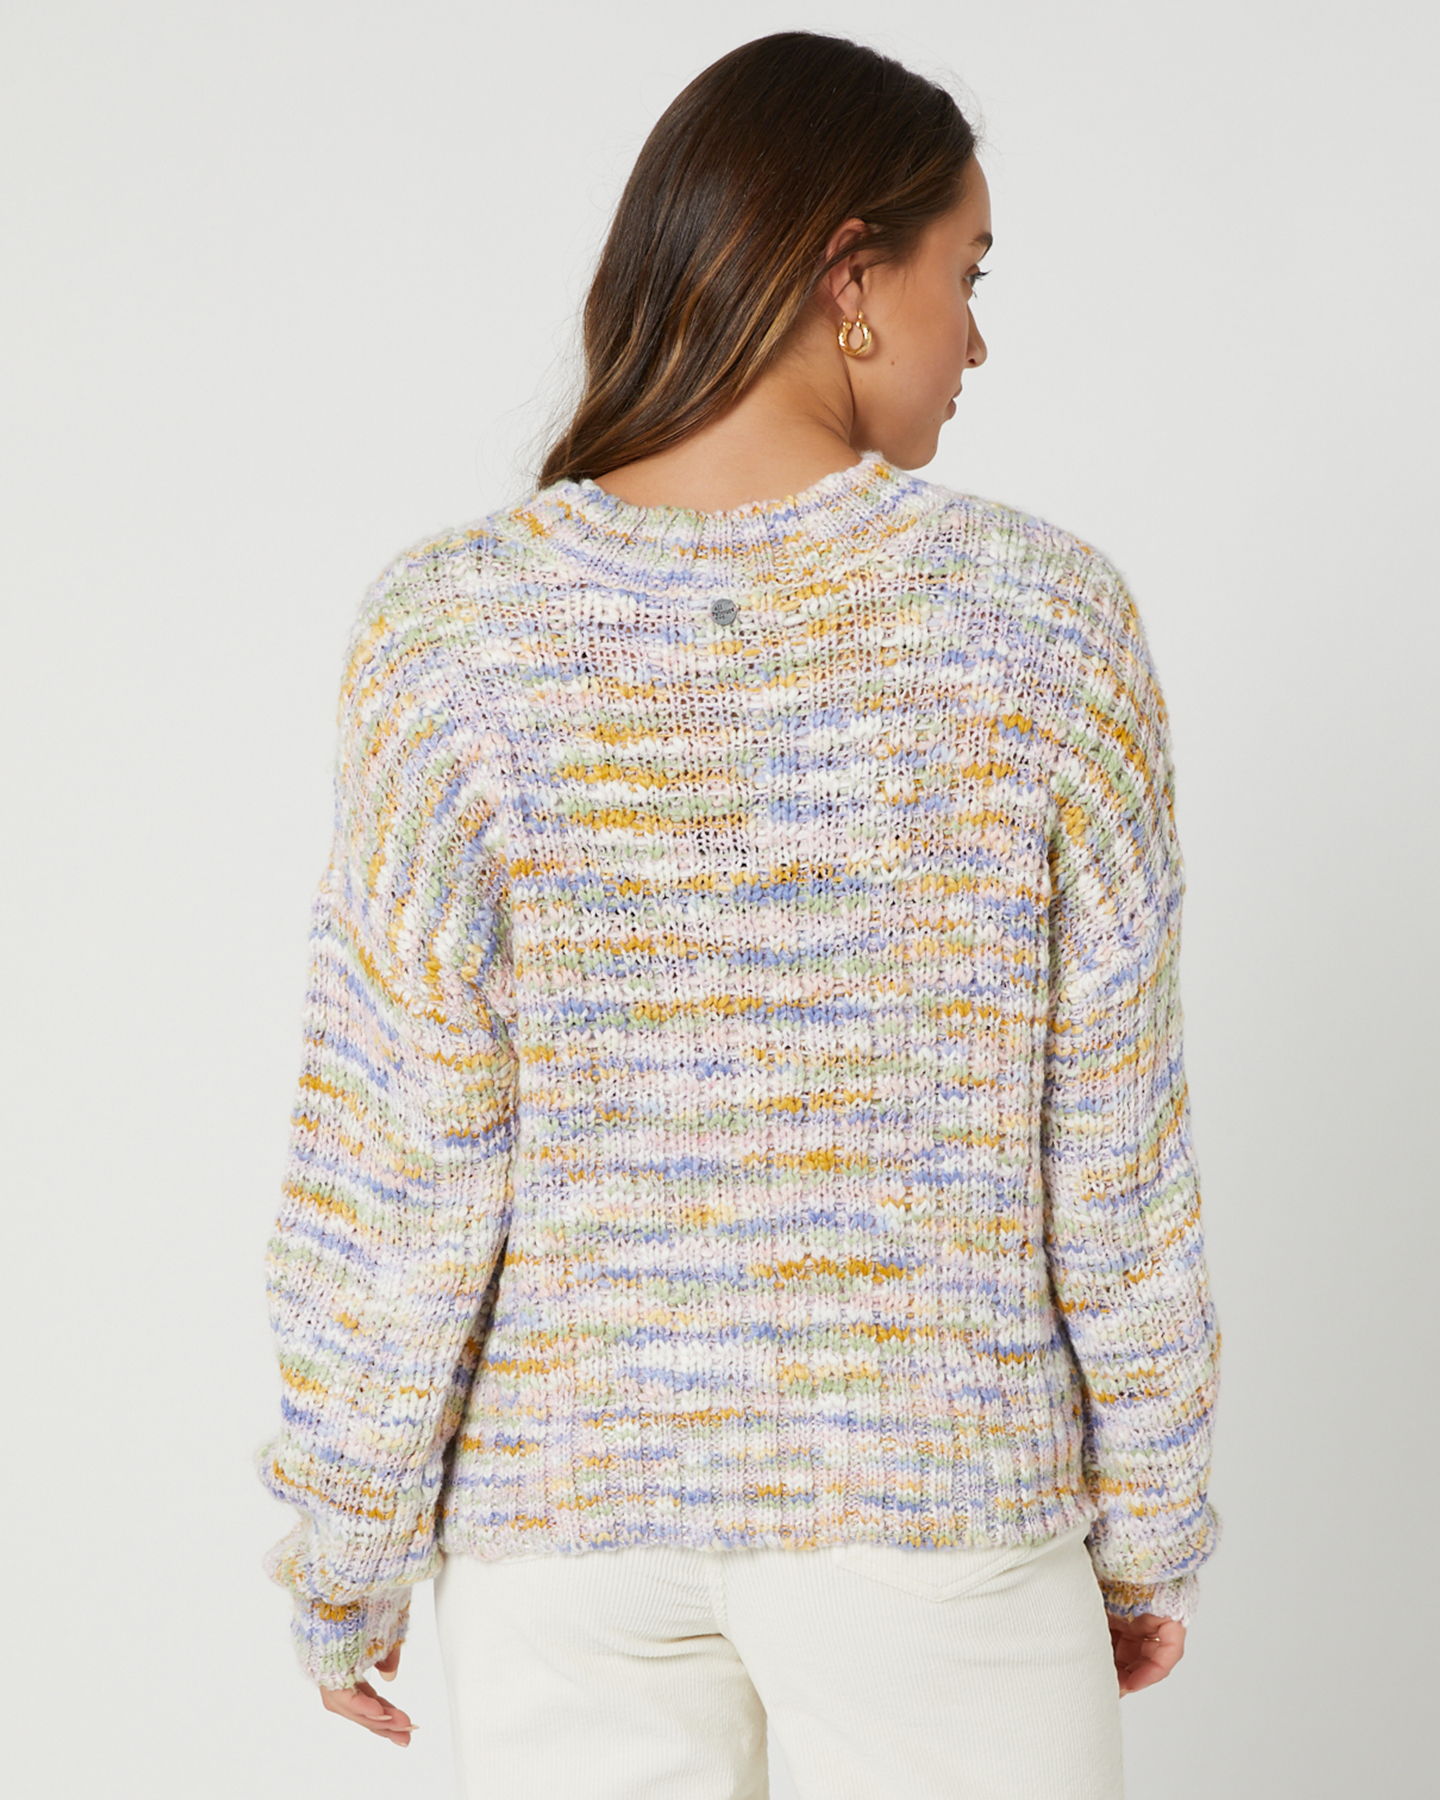 All About Eve Sofia Multi Knit - Multi | SurfStitch